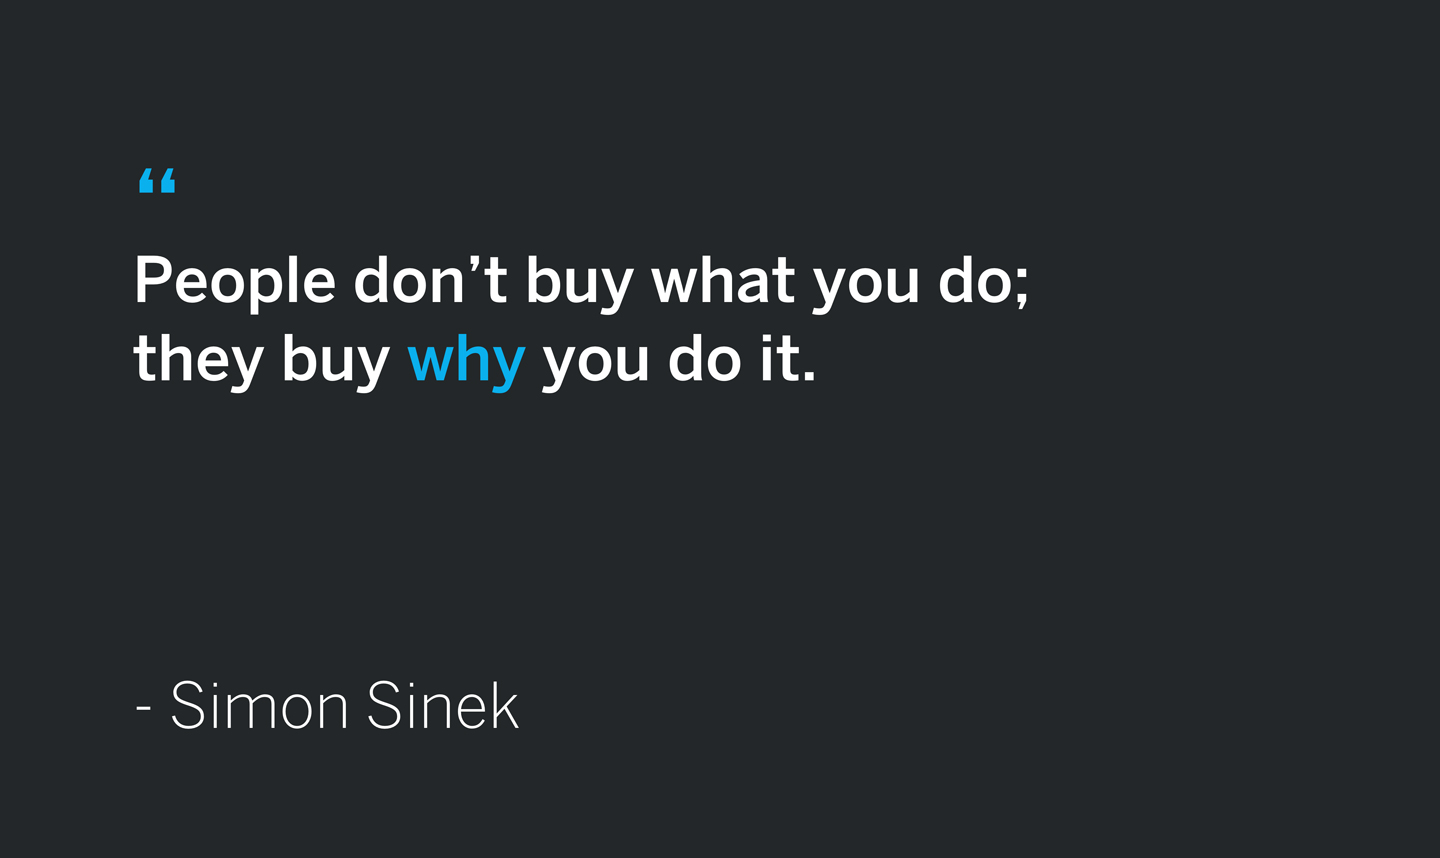 Simon Sinek quote that says "People don't buy what you do; they buy why you do it."